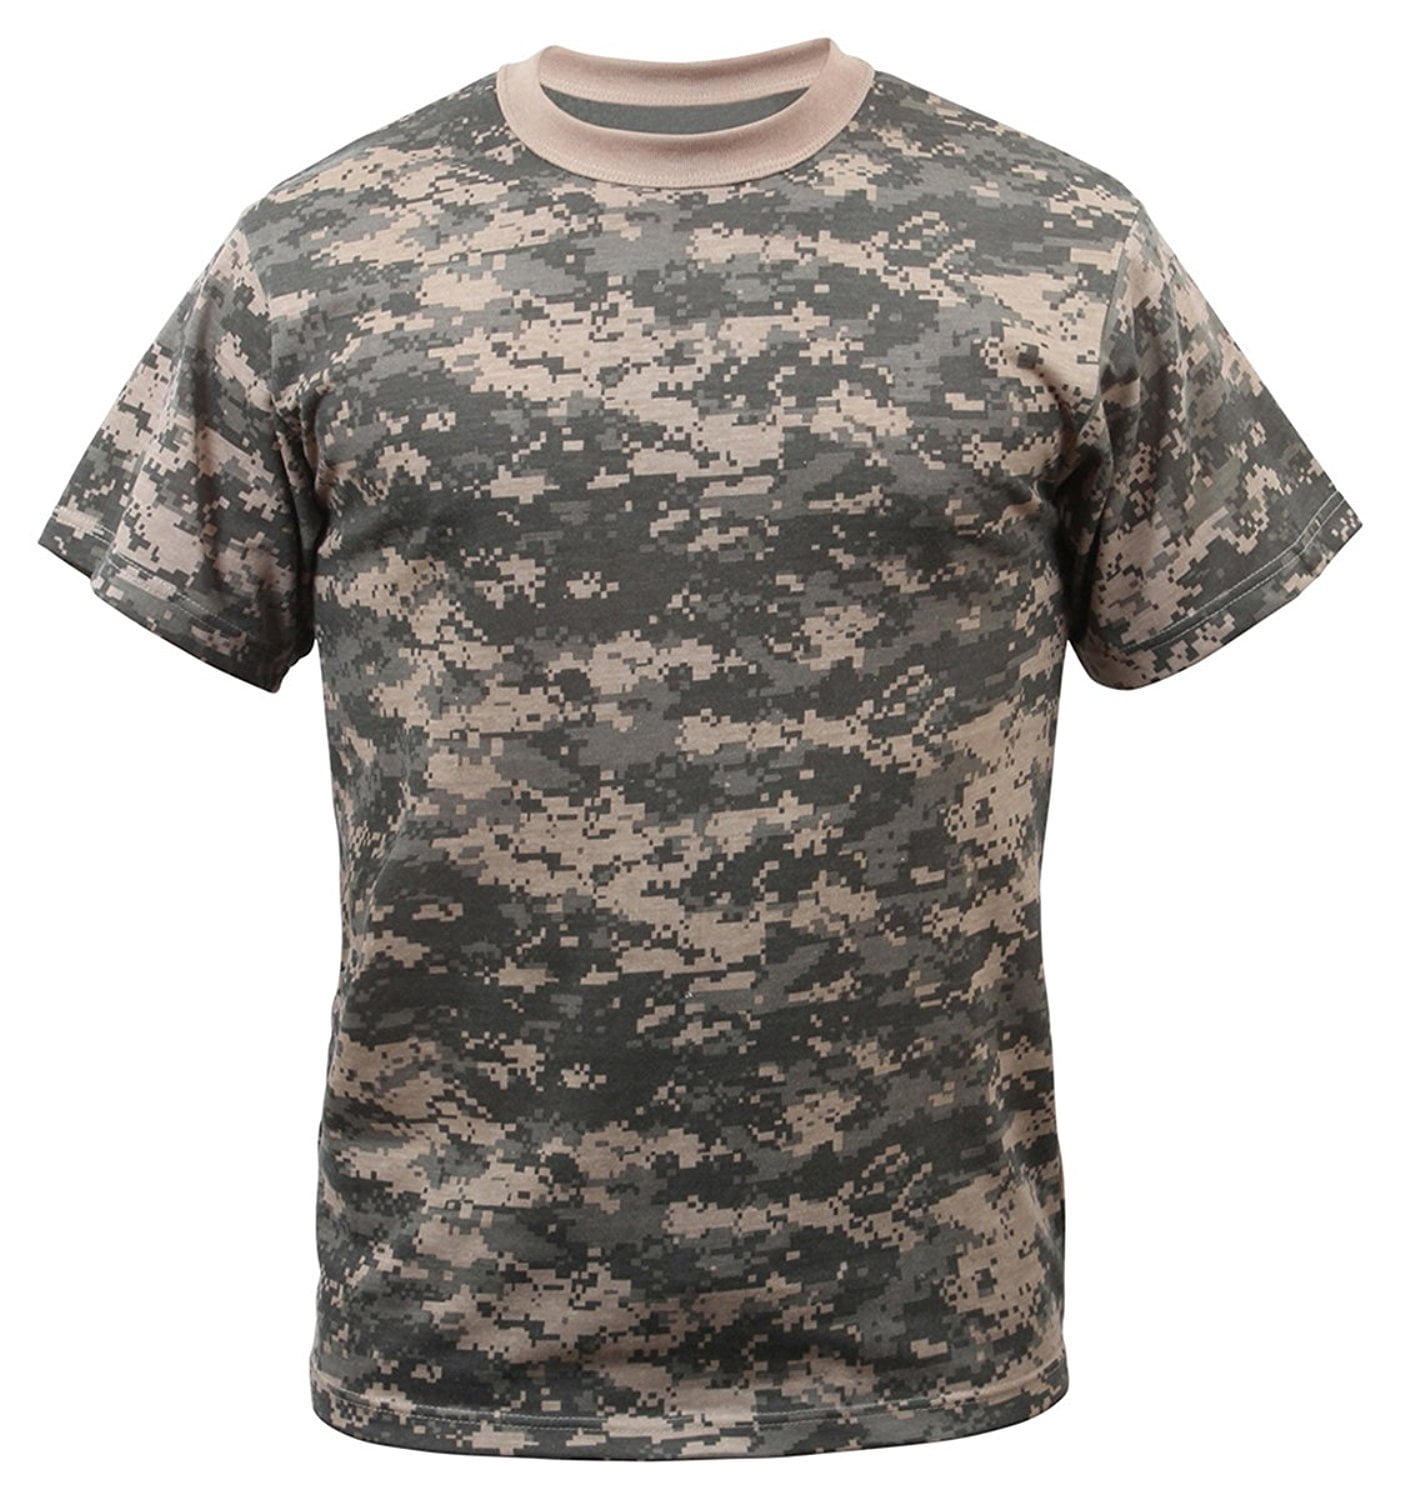 US Military Style Top Army Hunting Woodland Camo Tee Mens Combat T-Shirt S-3XL 